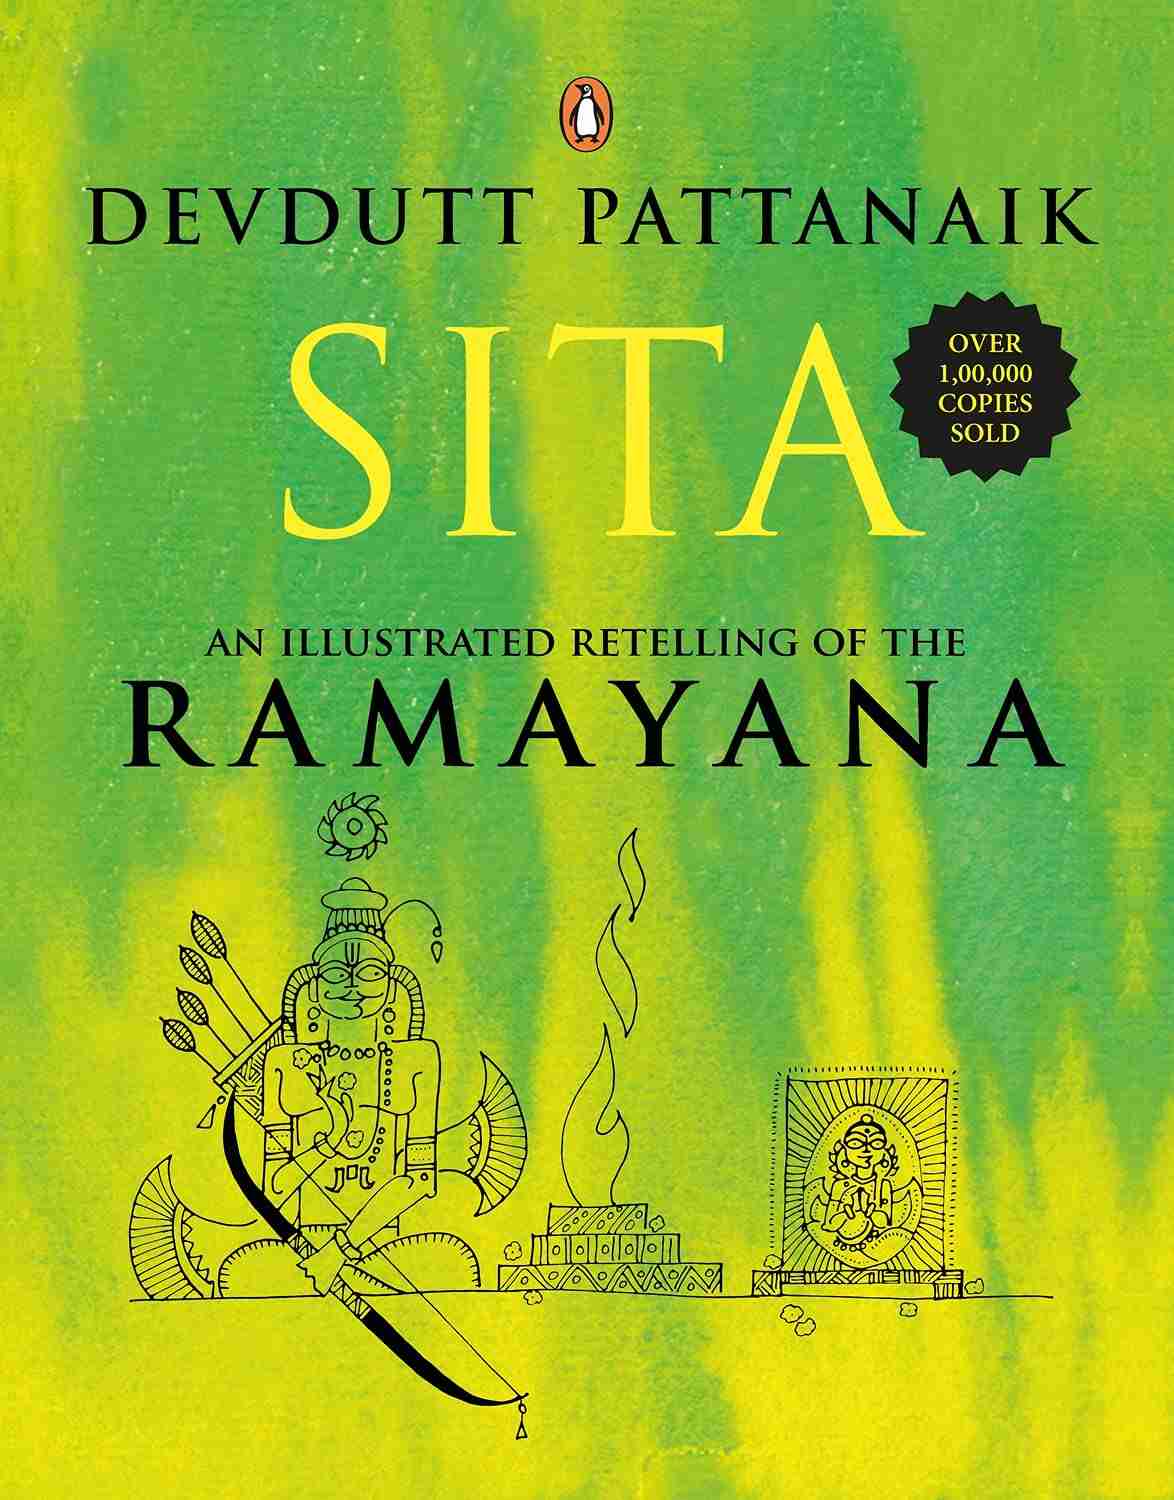 sita an illustrated retelling of the ramayana ebook free download